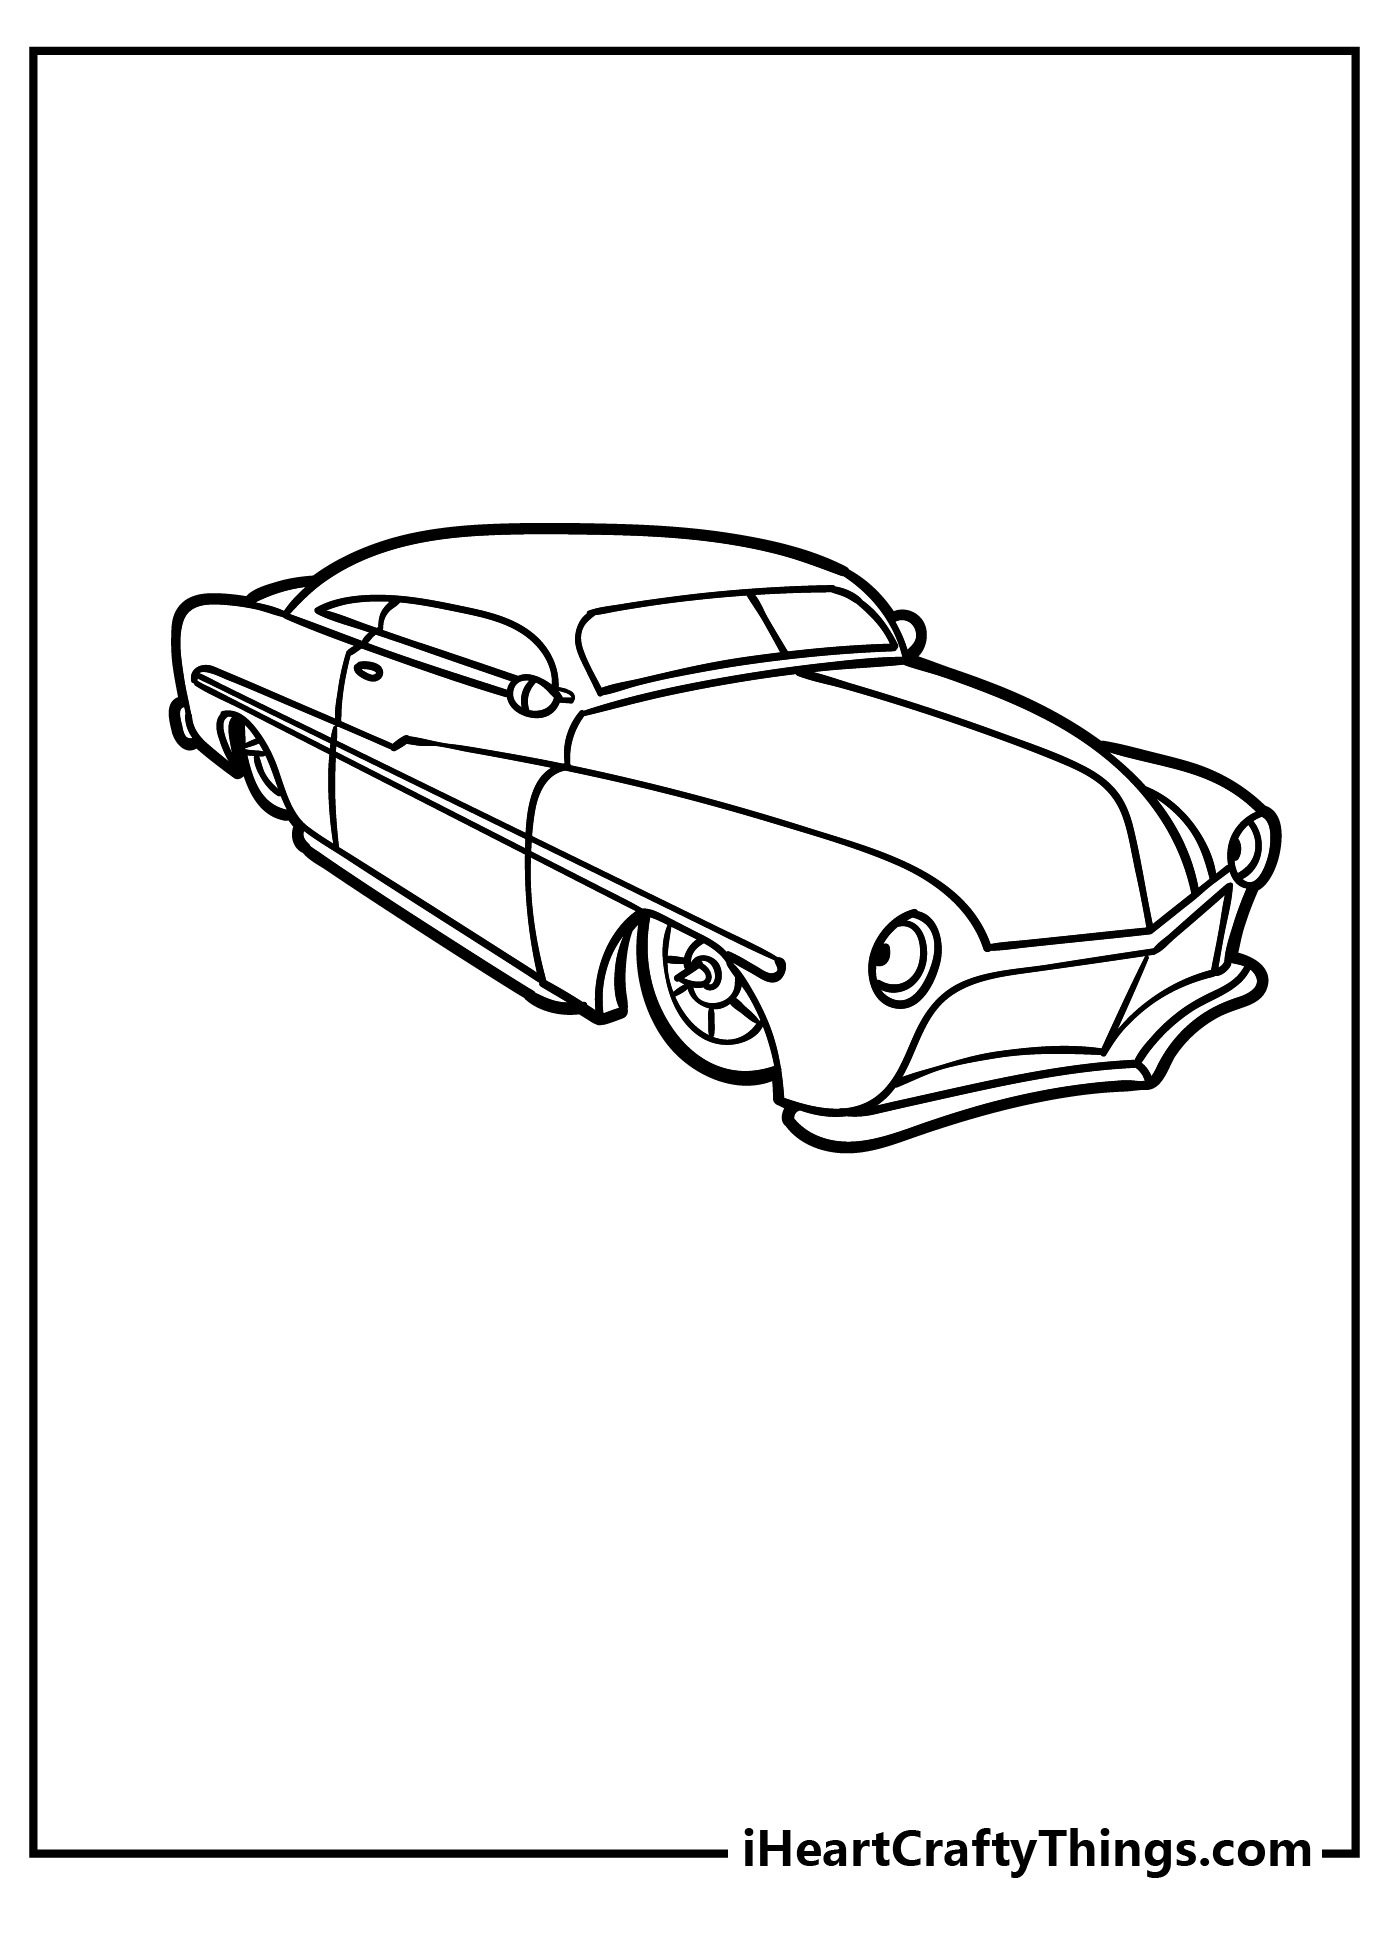 Hot Rod Easy Coloring Pages